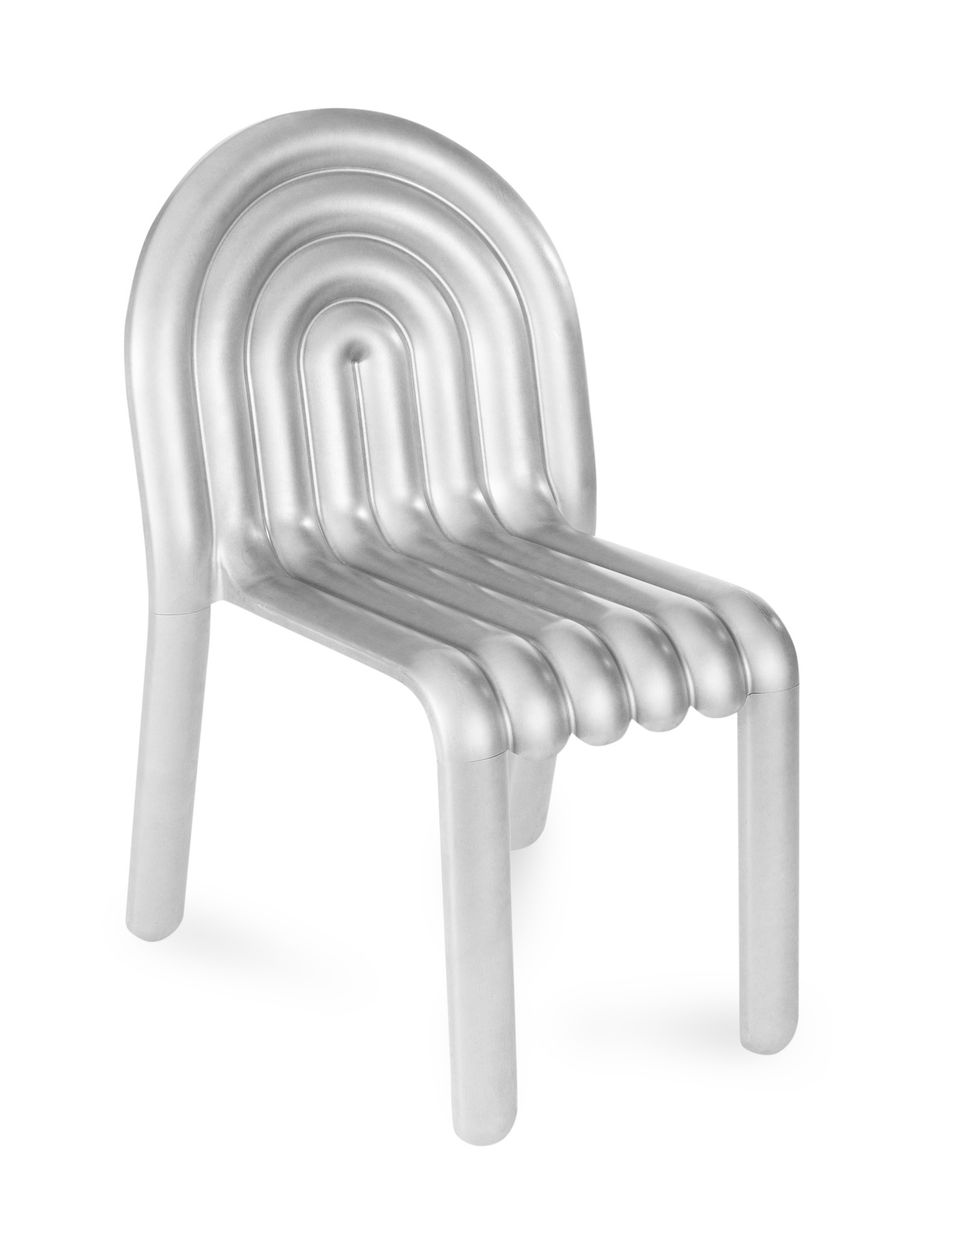 metal chair whose back and seat looks like piping